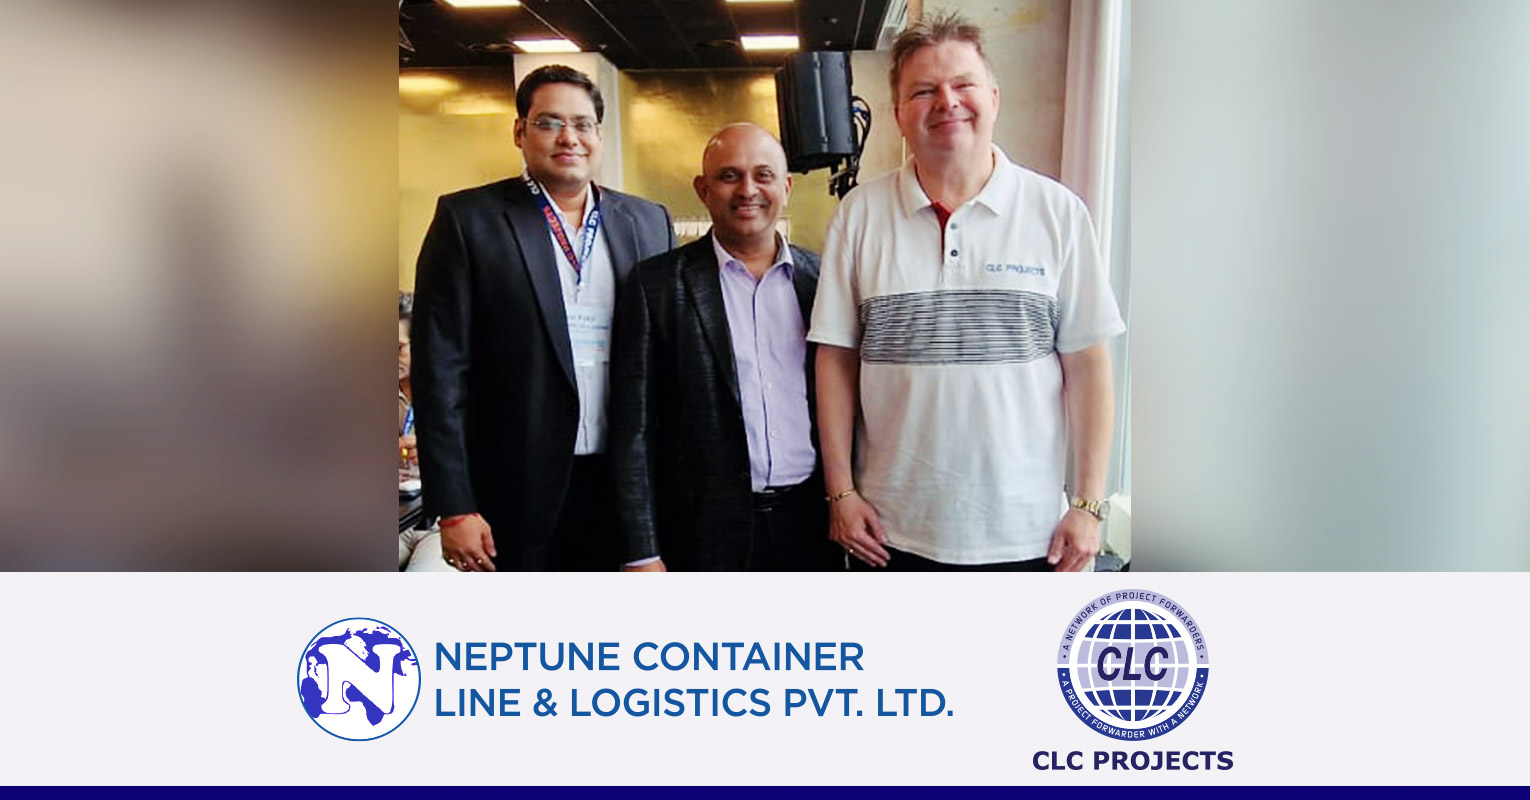 Amol Patil & Walter George of Neptune Container Line & Logistics and CLC Projects Chairman at joint network meeting in Rotterdam